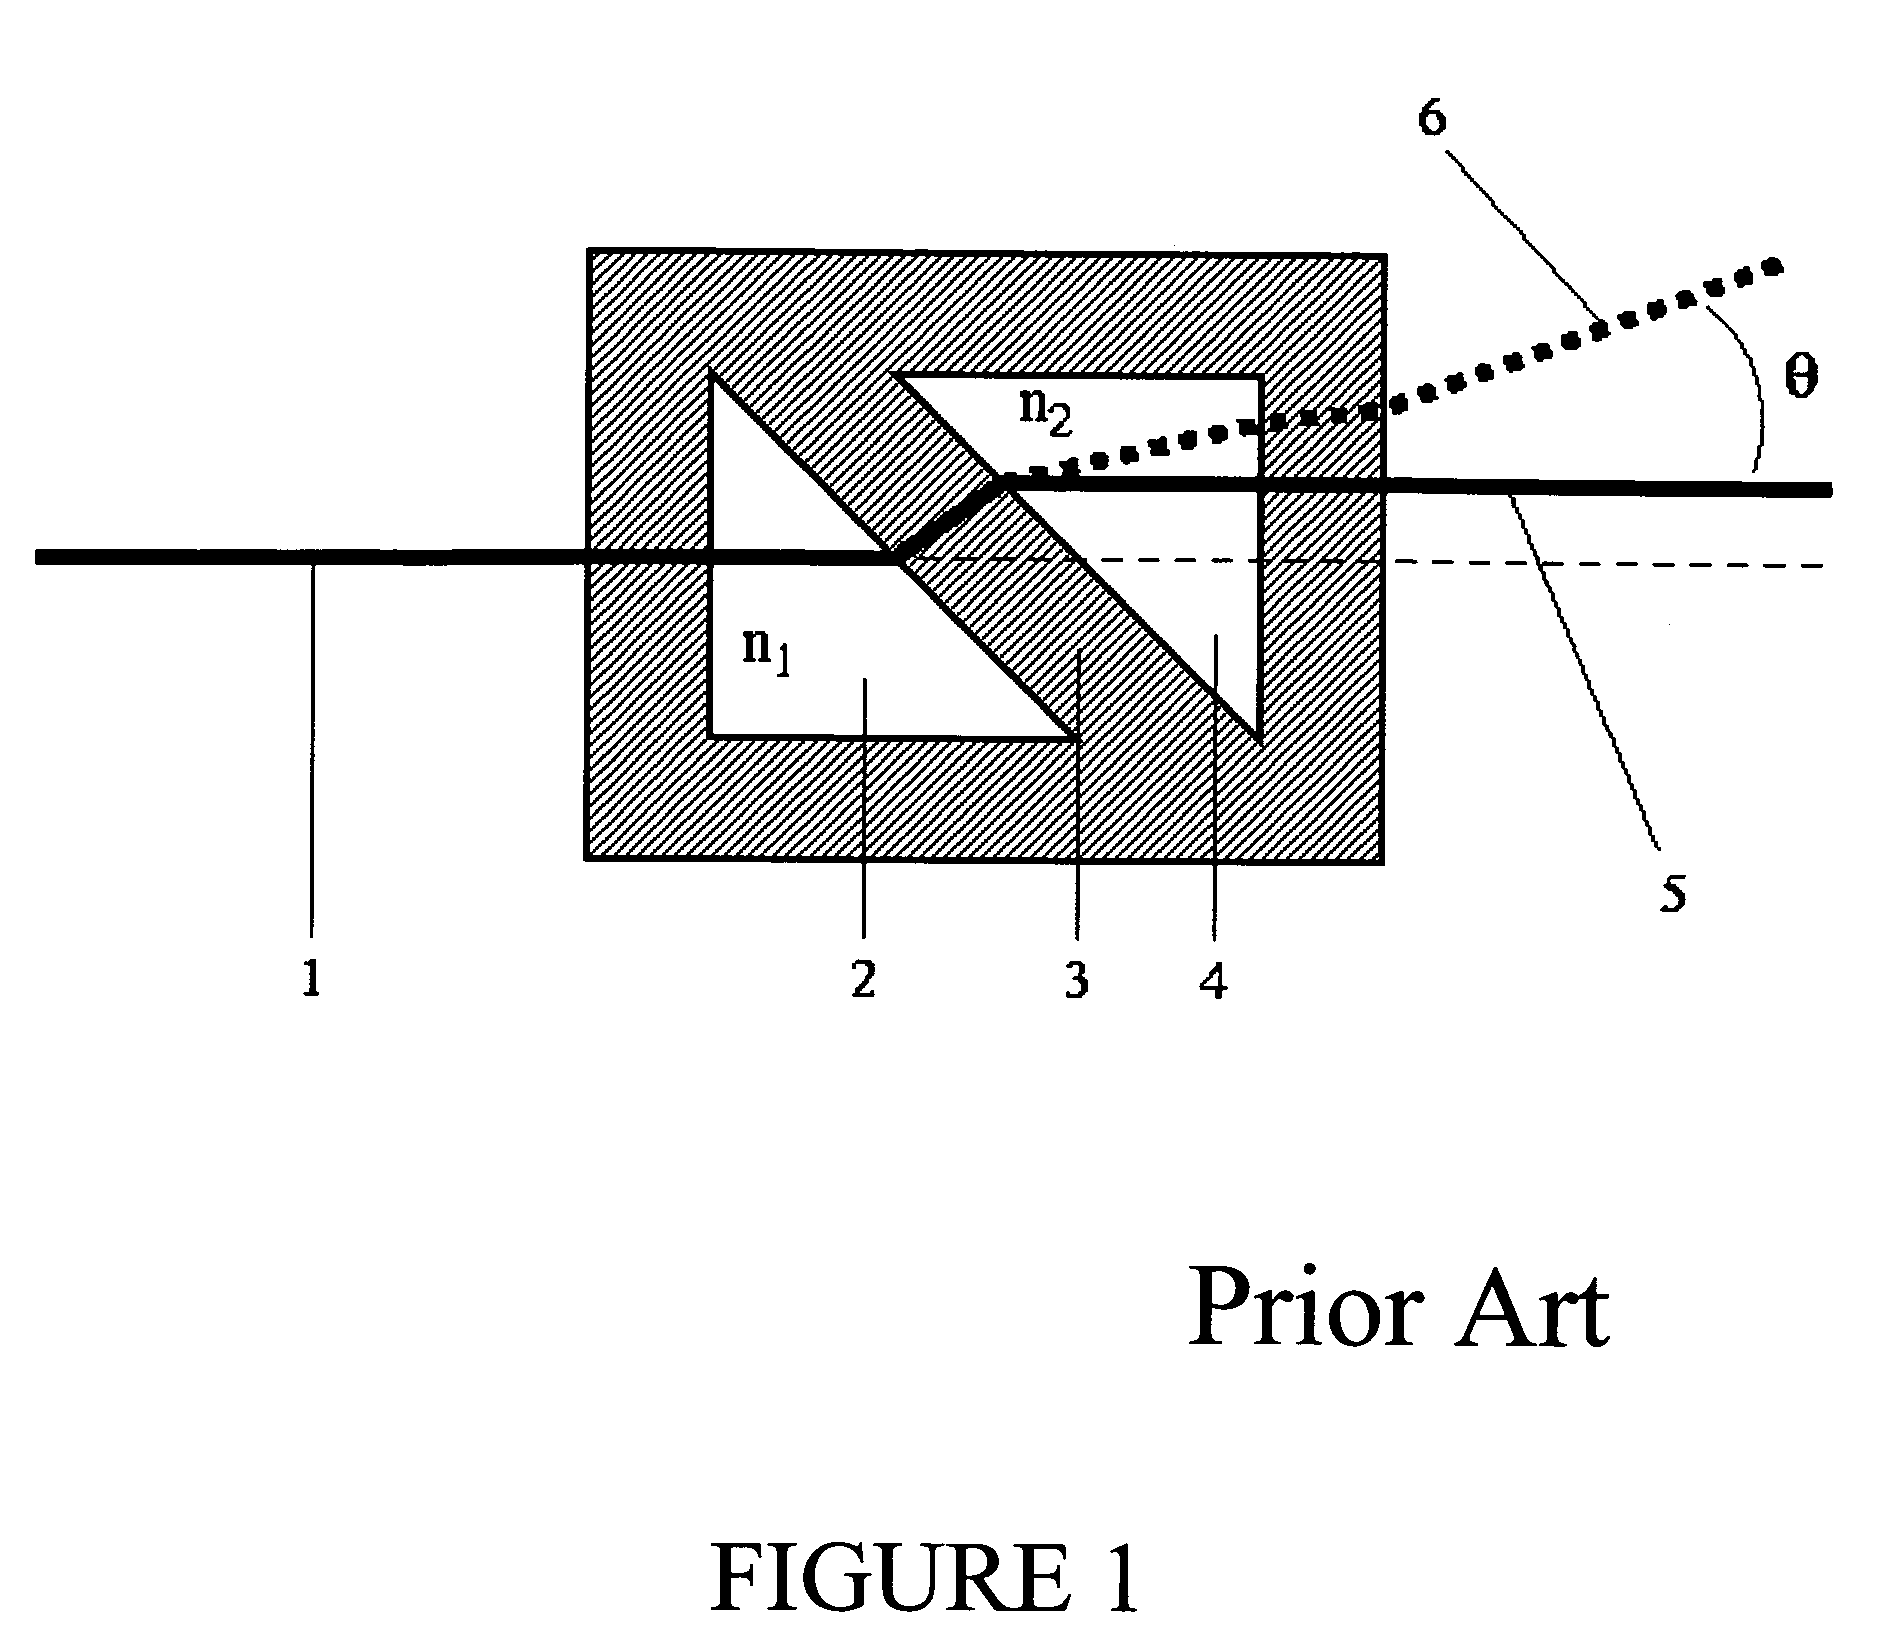 Enhanced sensitivity differential refractometer incorporating a photodetector array